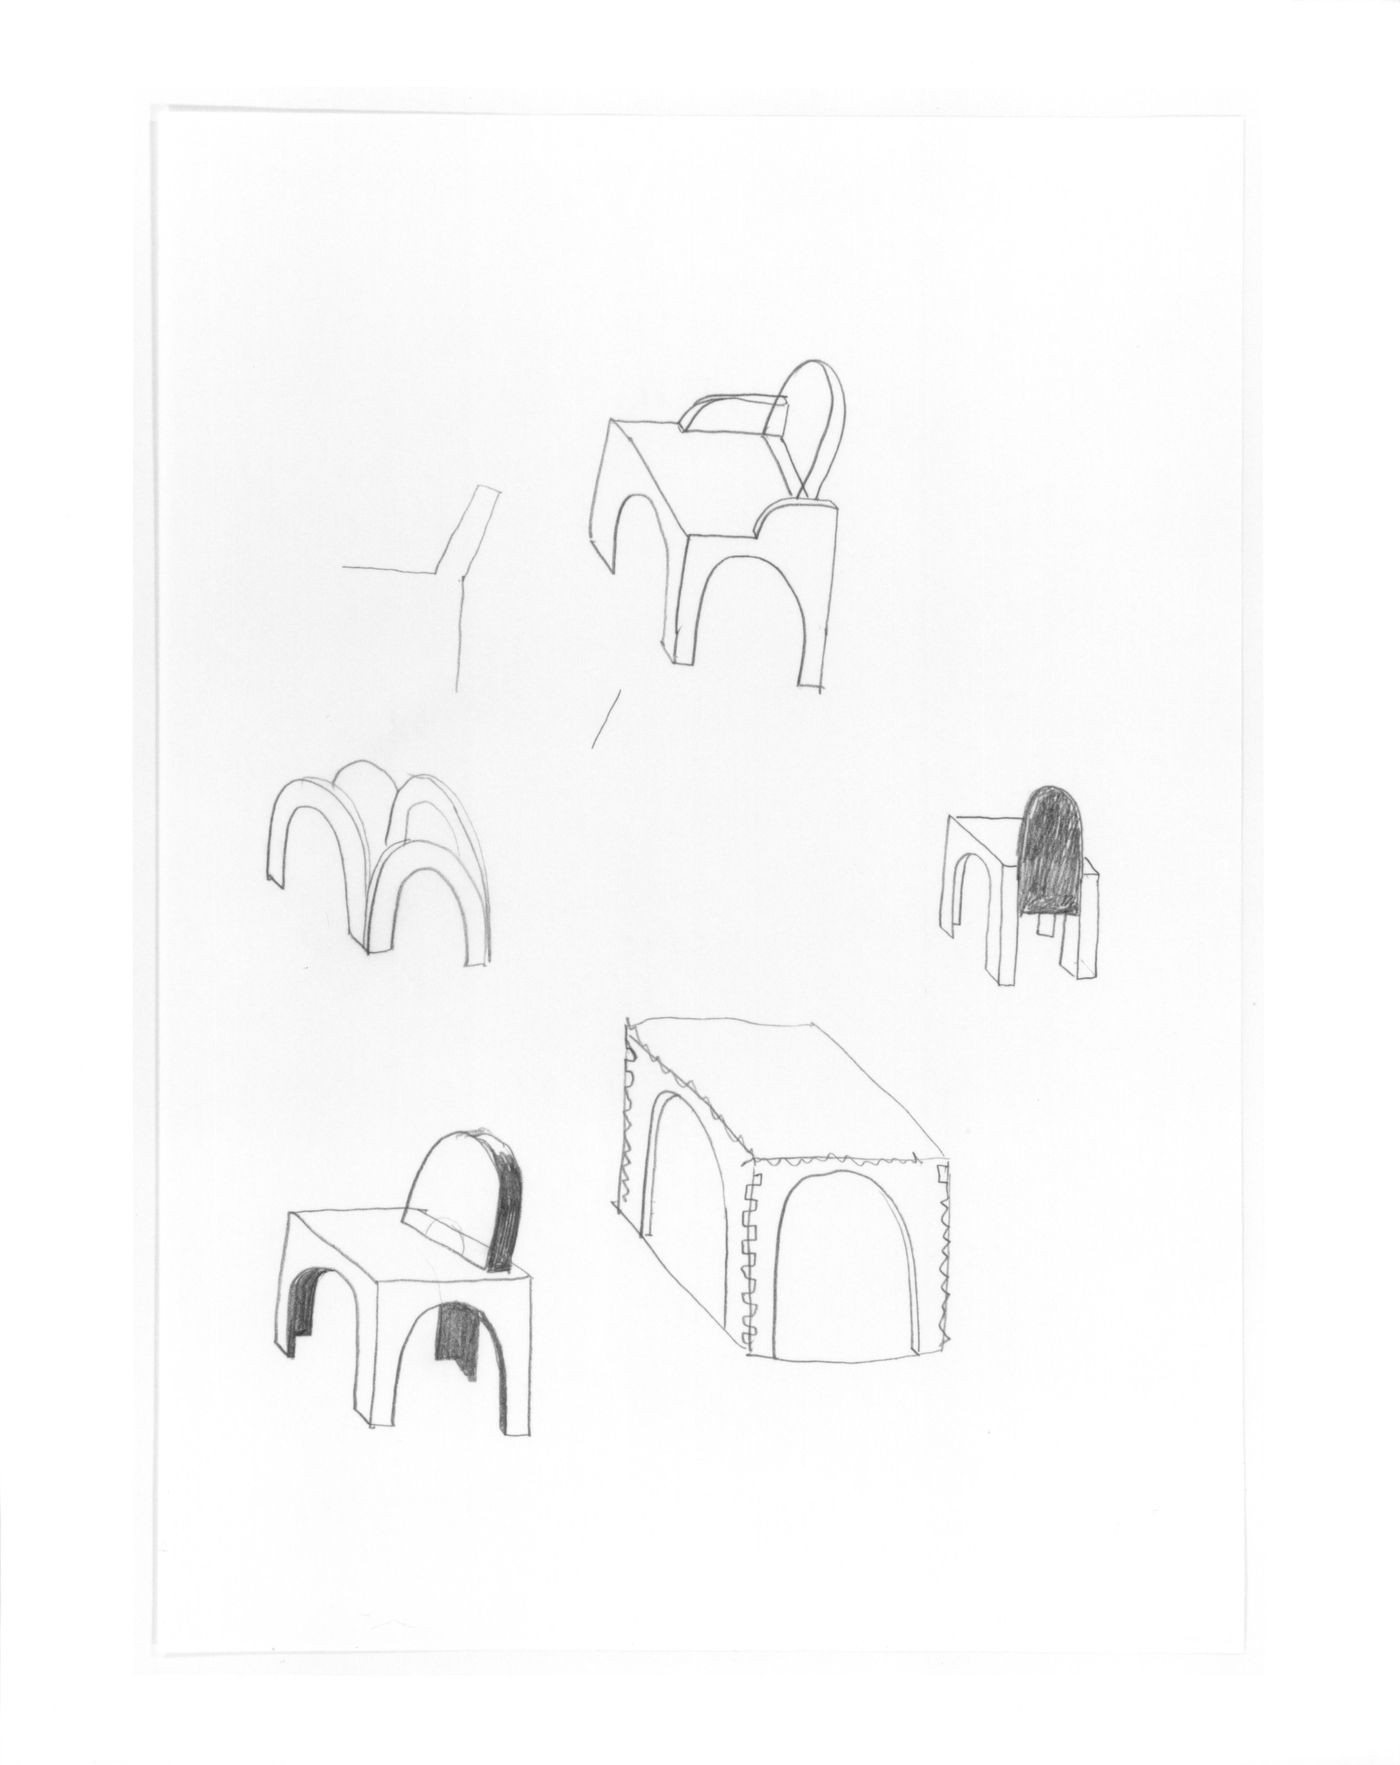 Design development sketches for a chair for the Shaughnessy House, Centre Canadien d'Architecture, Montréal